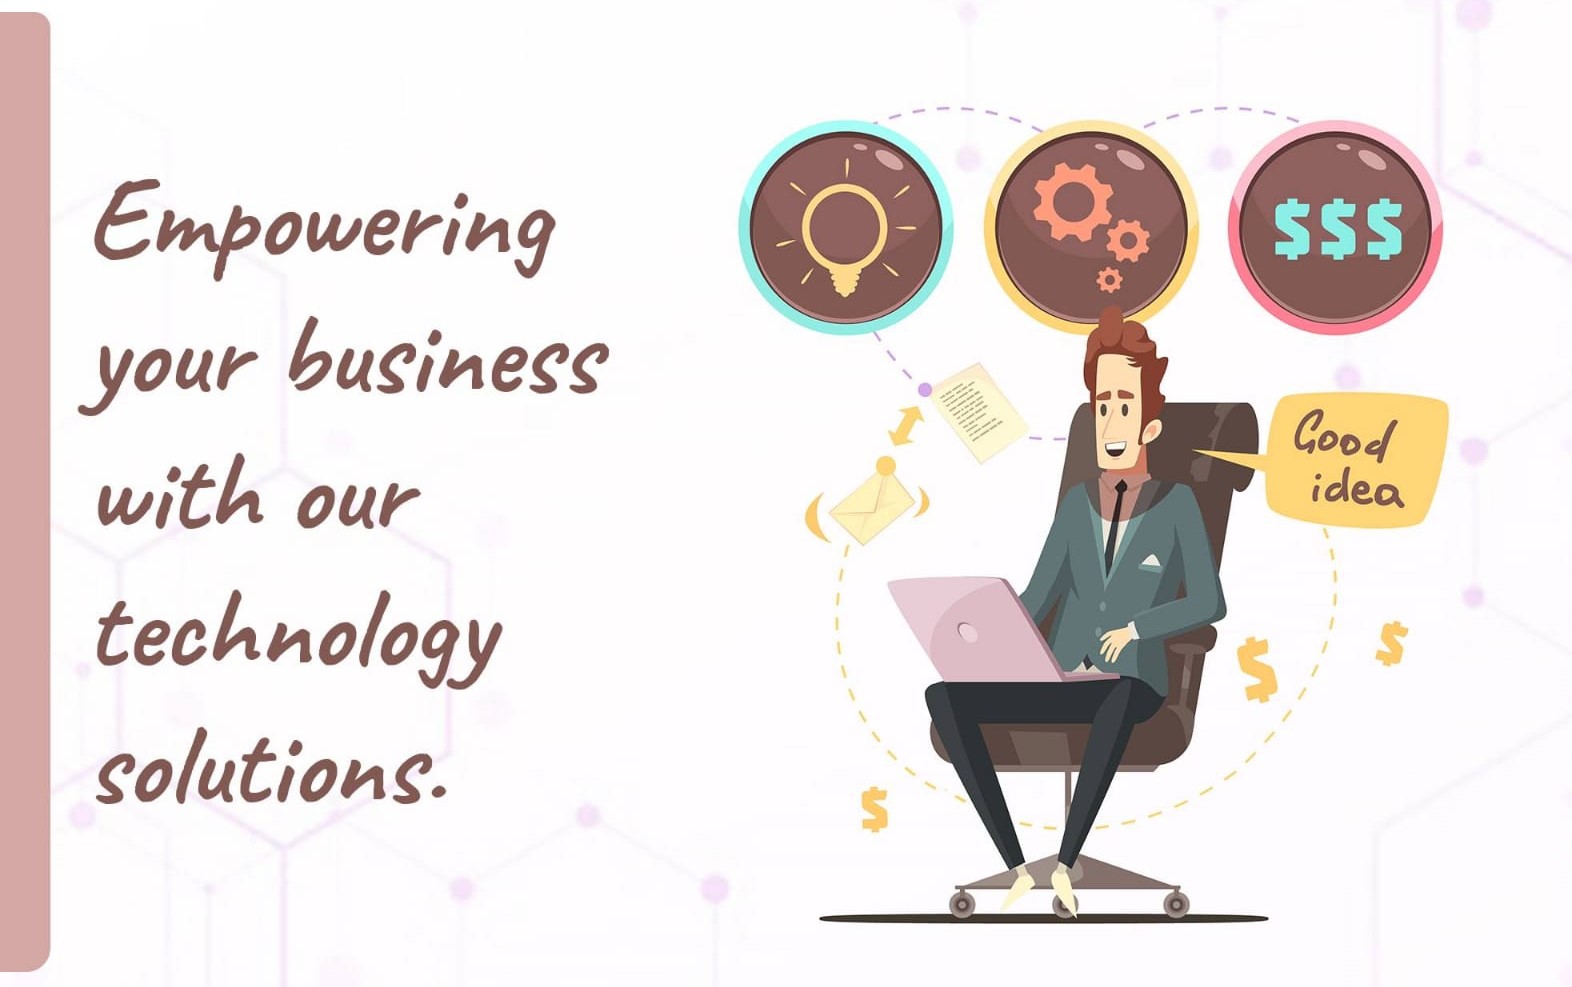 Good idea - Empowering your business with our technology solutions.